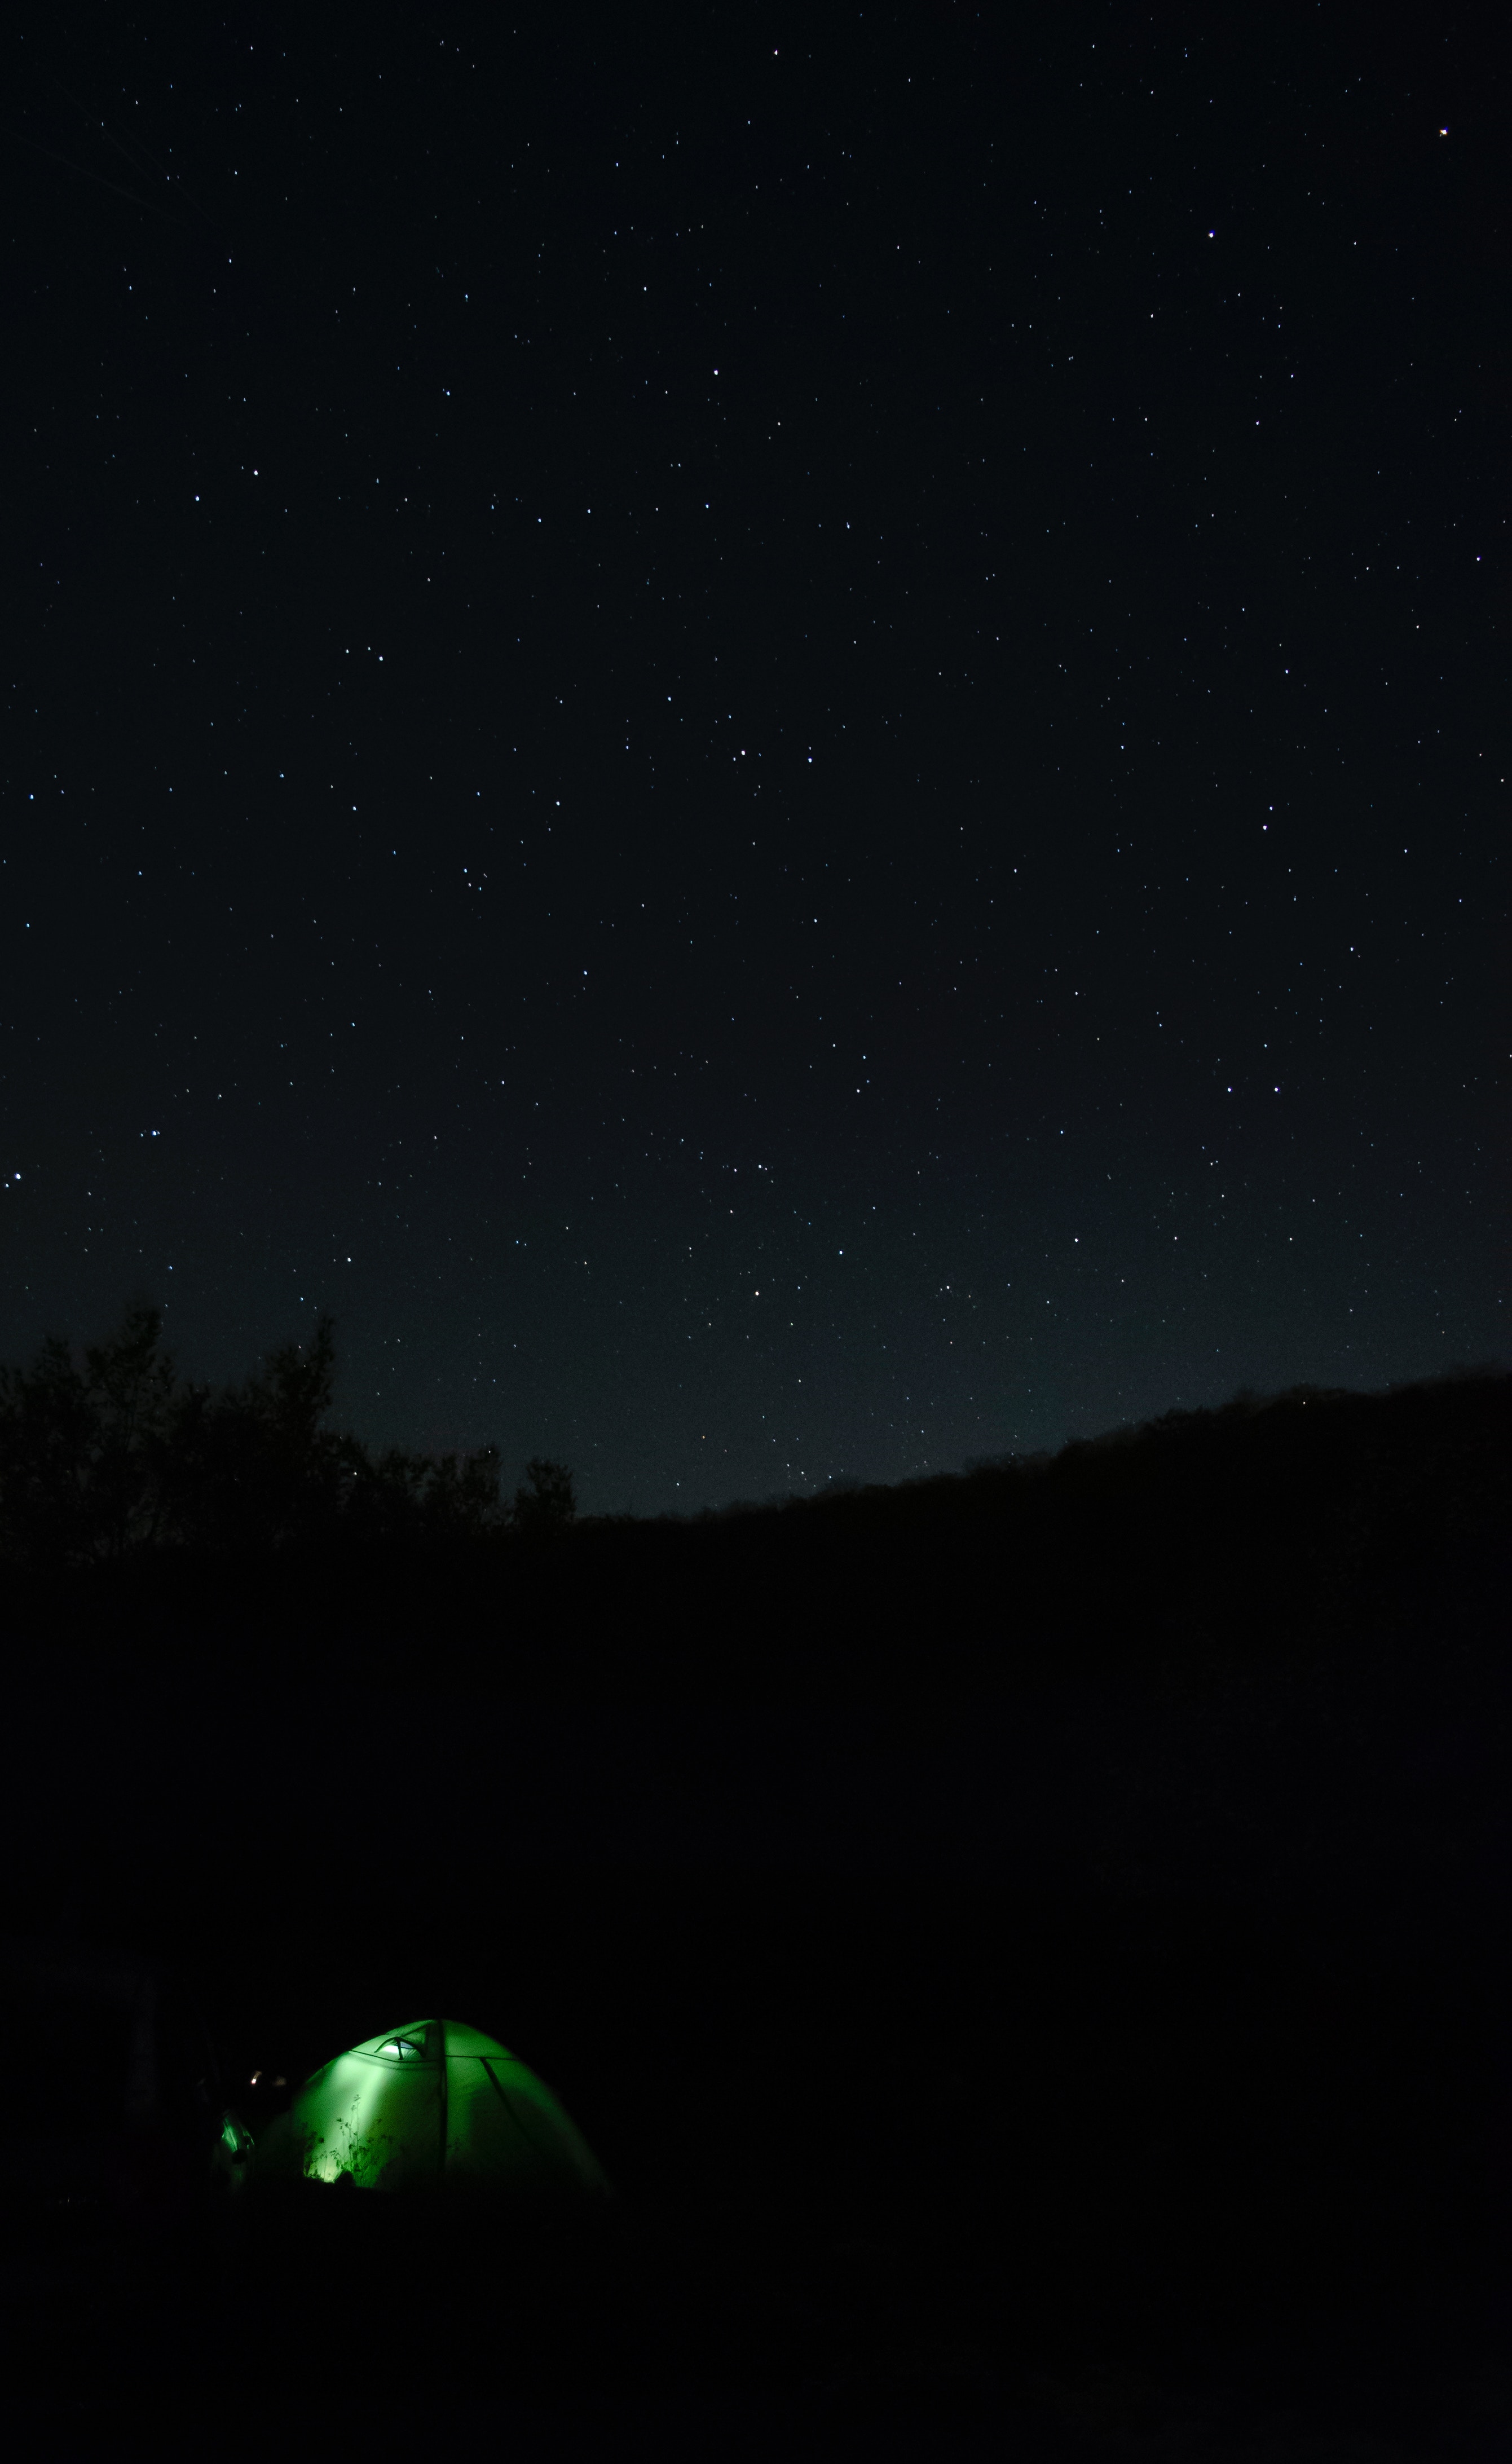 night, camping, darkness, black, tent, starry sky, campsite